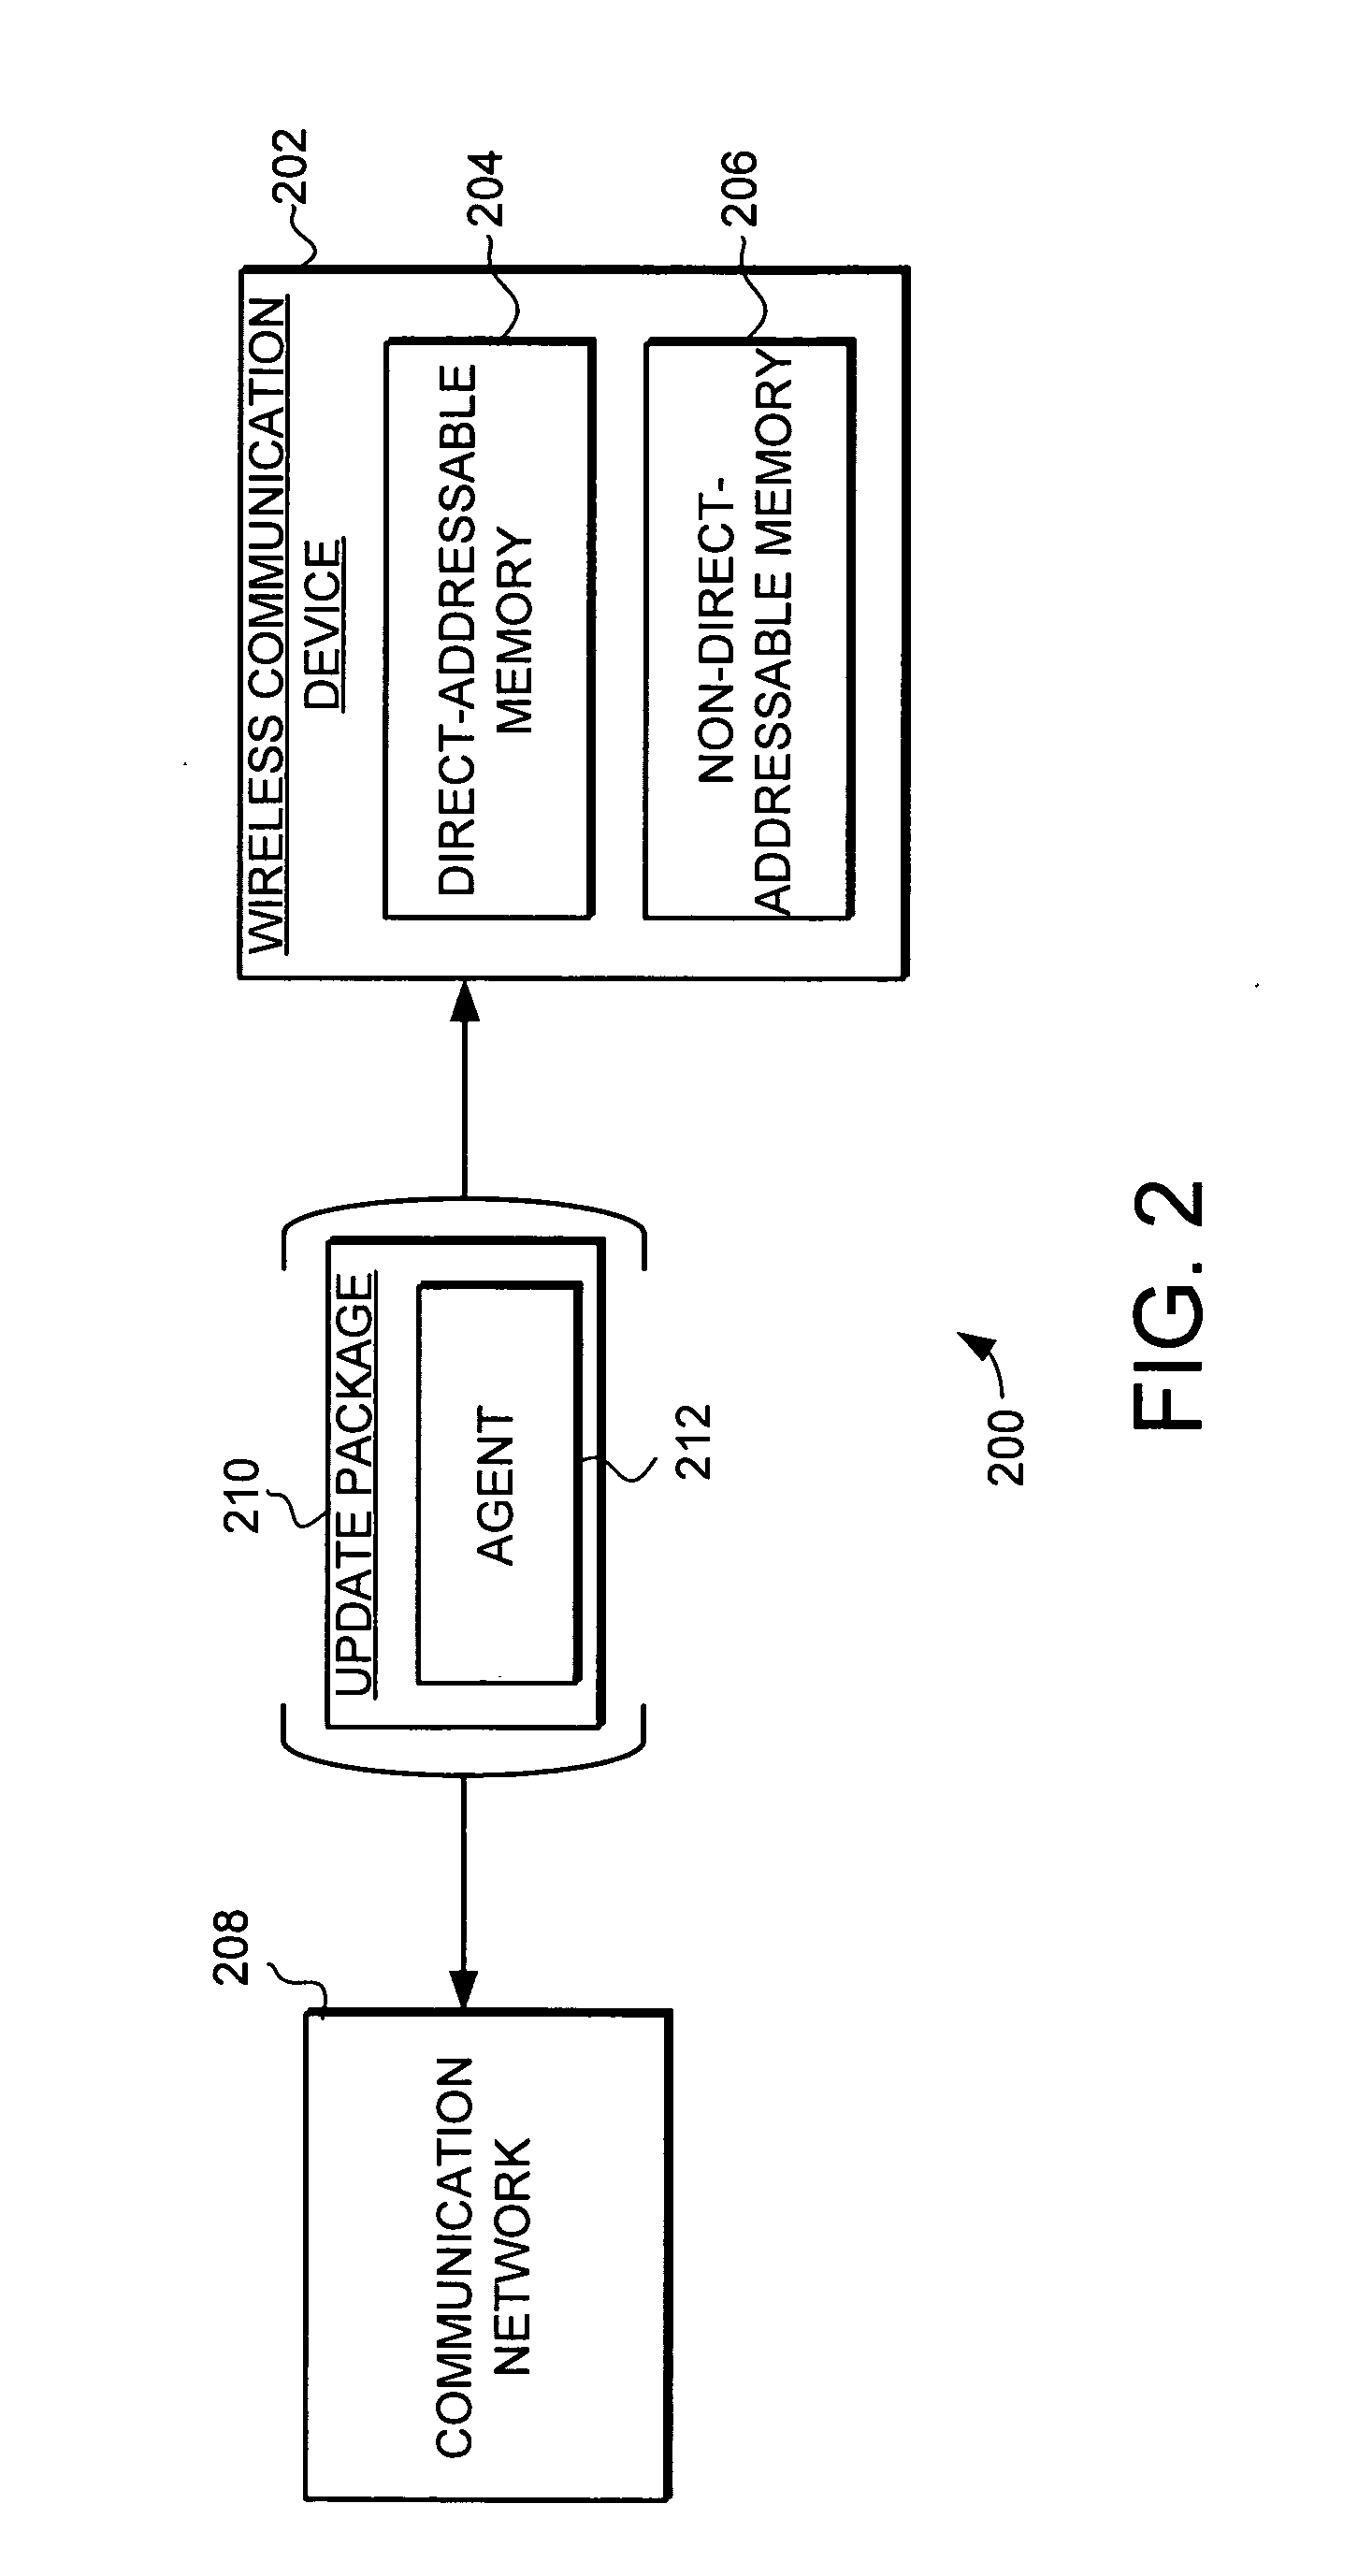 System and method for over-the-air update of wireless communication devices